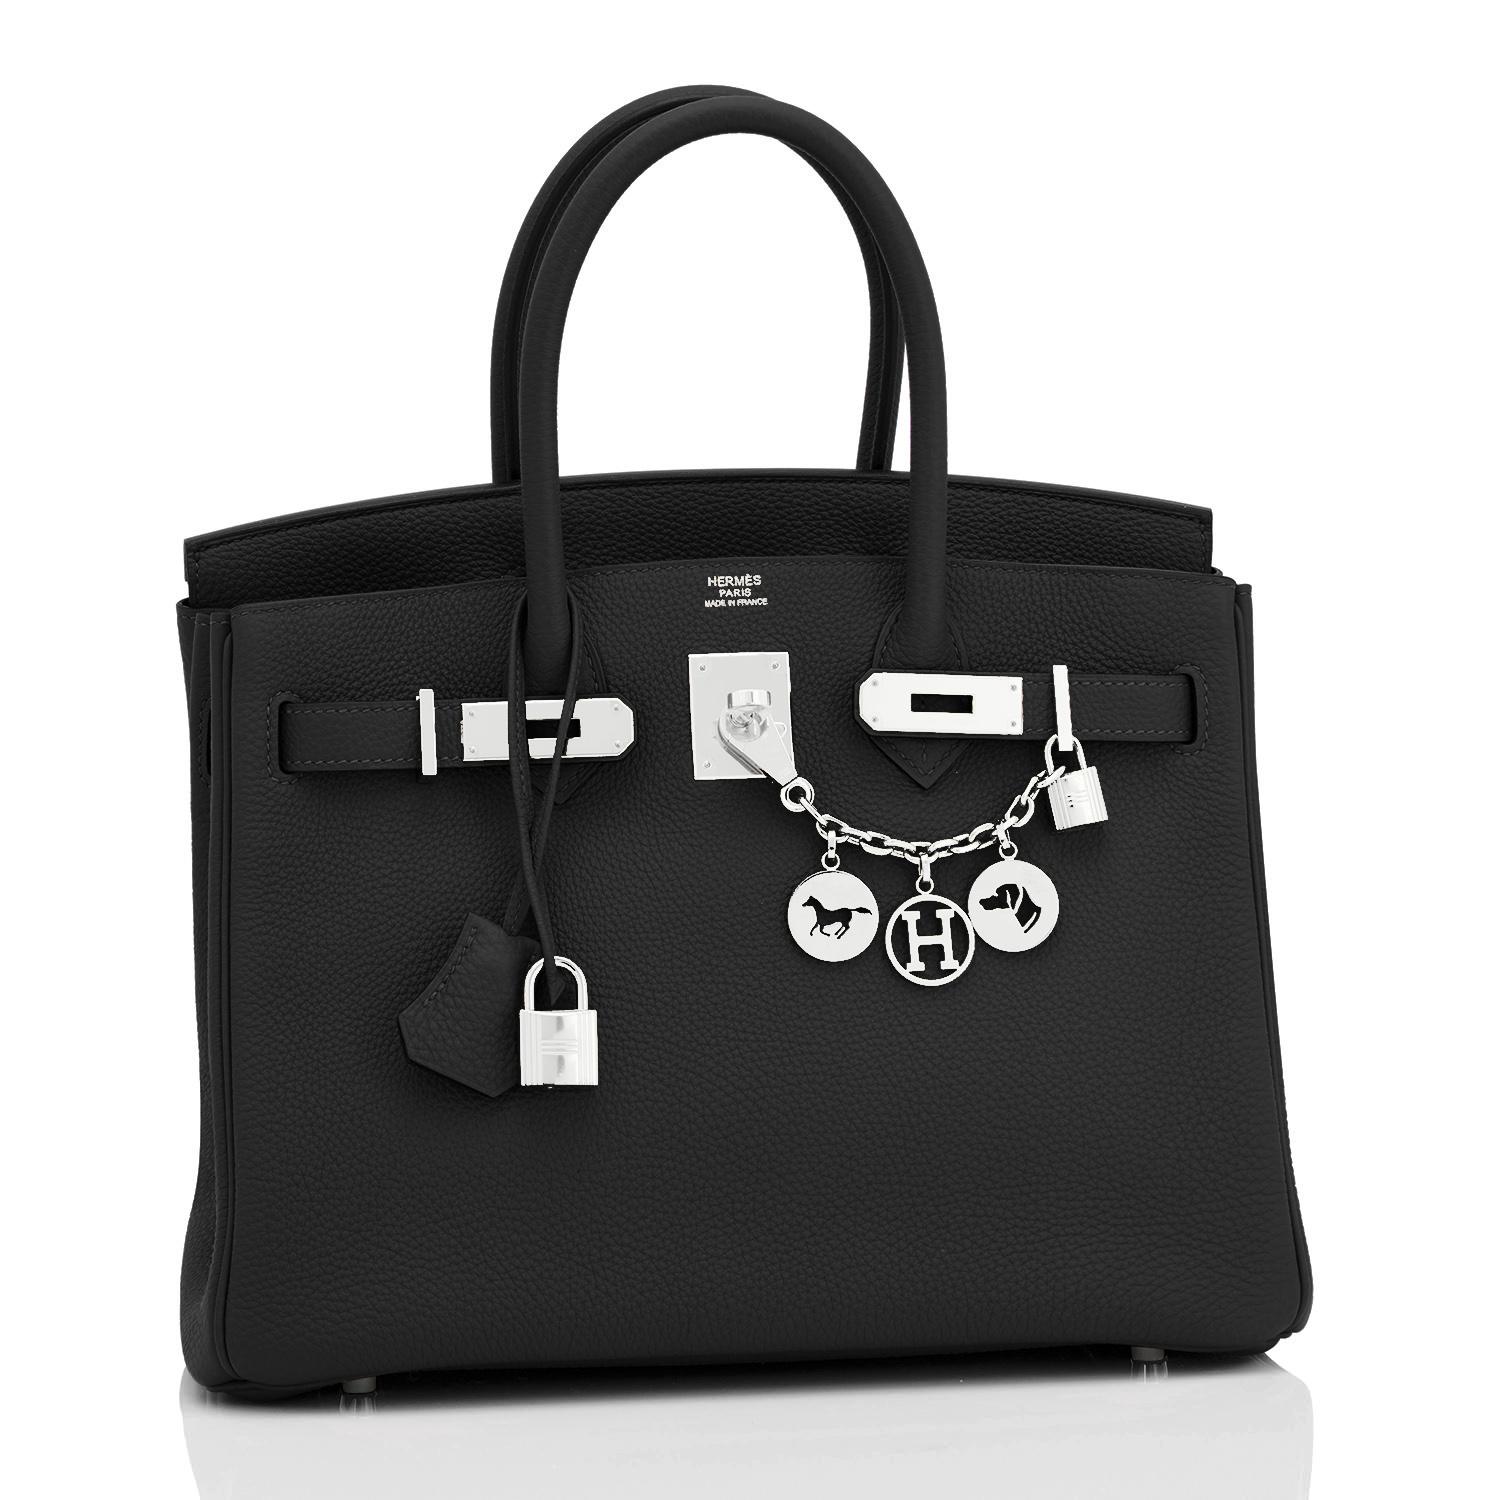 Hermes Birkin 30cm Black Togo Palladium Hardware Bag NEW
Brand New in Box. Store Fresh. Pristine Condition (with plastic on hardware)
Perfect gift! Comes with keys, lock, clochette, a sleeper for the bag, rain protector, and Hermes box.
A superb